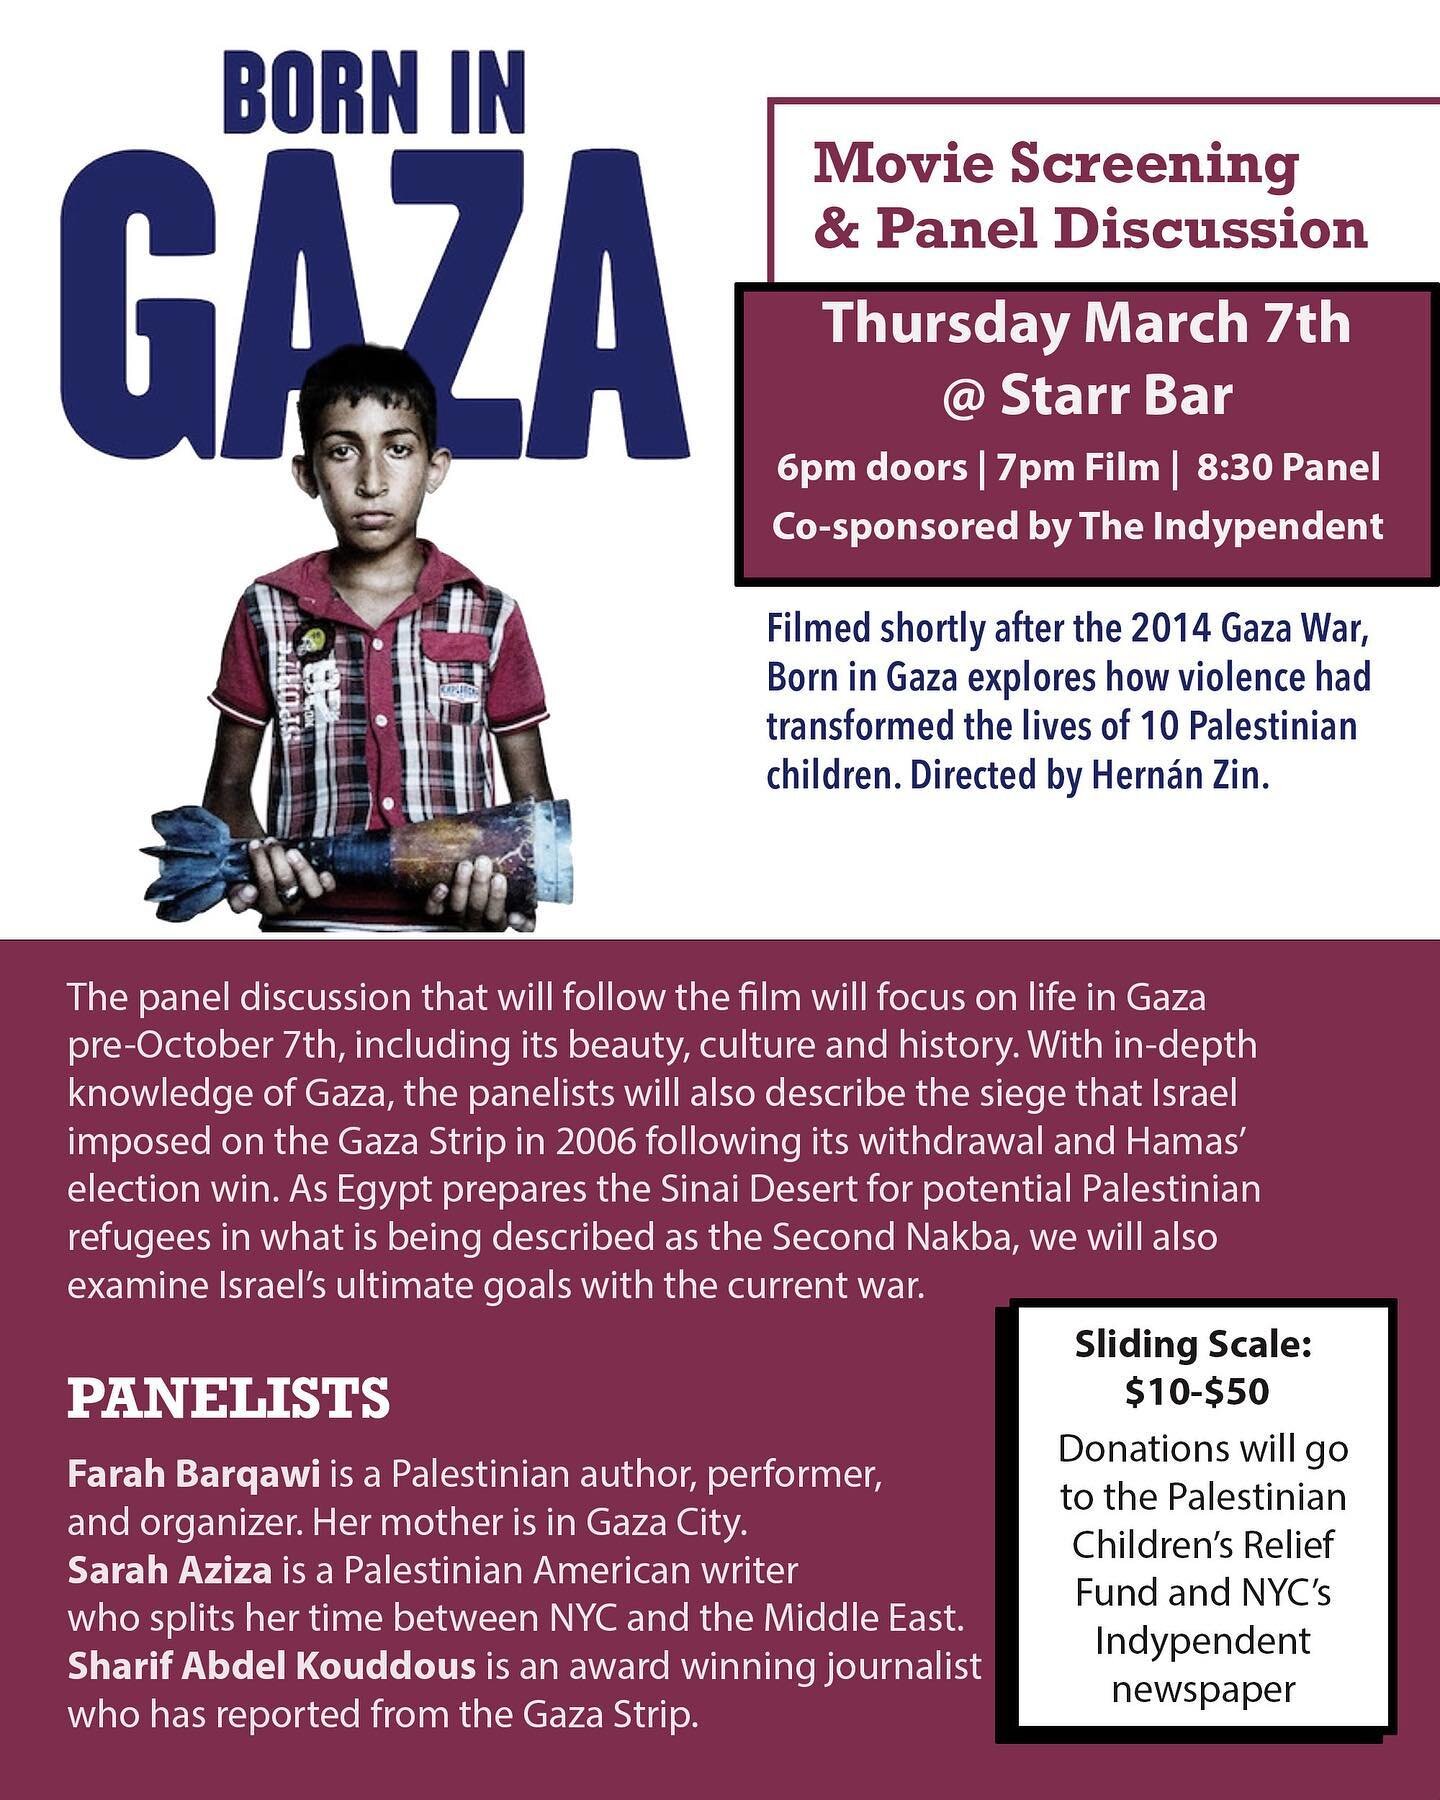 Tonight, join Starr Bar and @theindypendent for the second in a series of film screenings and panel discussions aimed at fostering better understanding of Israel&rsquo;s 75 year occupation of Palestine. 
We will screen the documentary film, Born in G